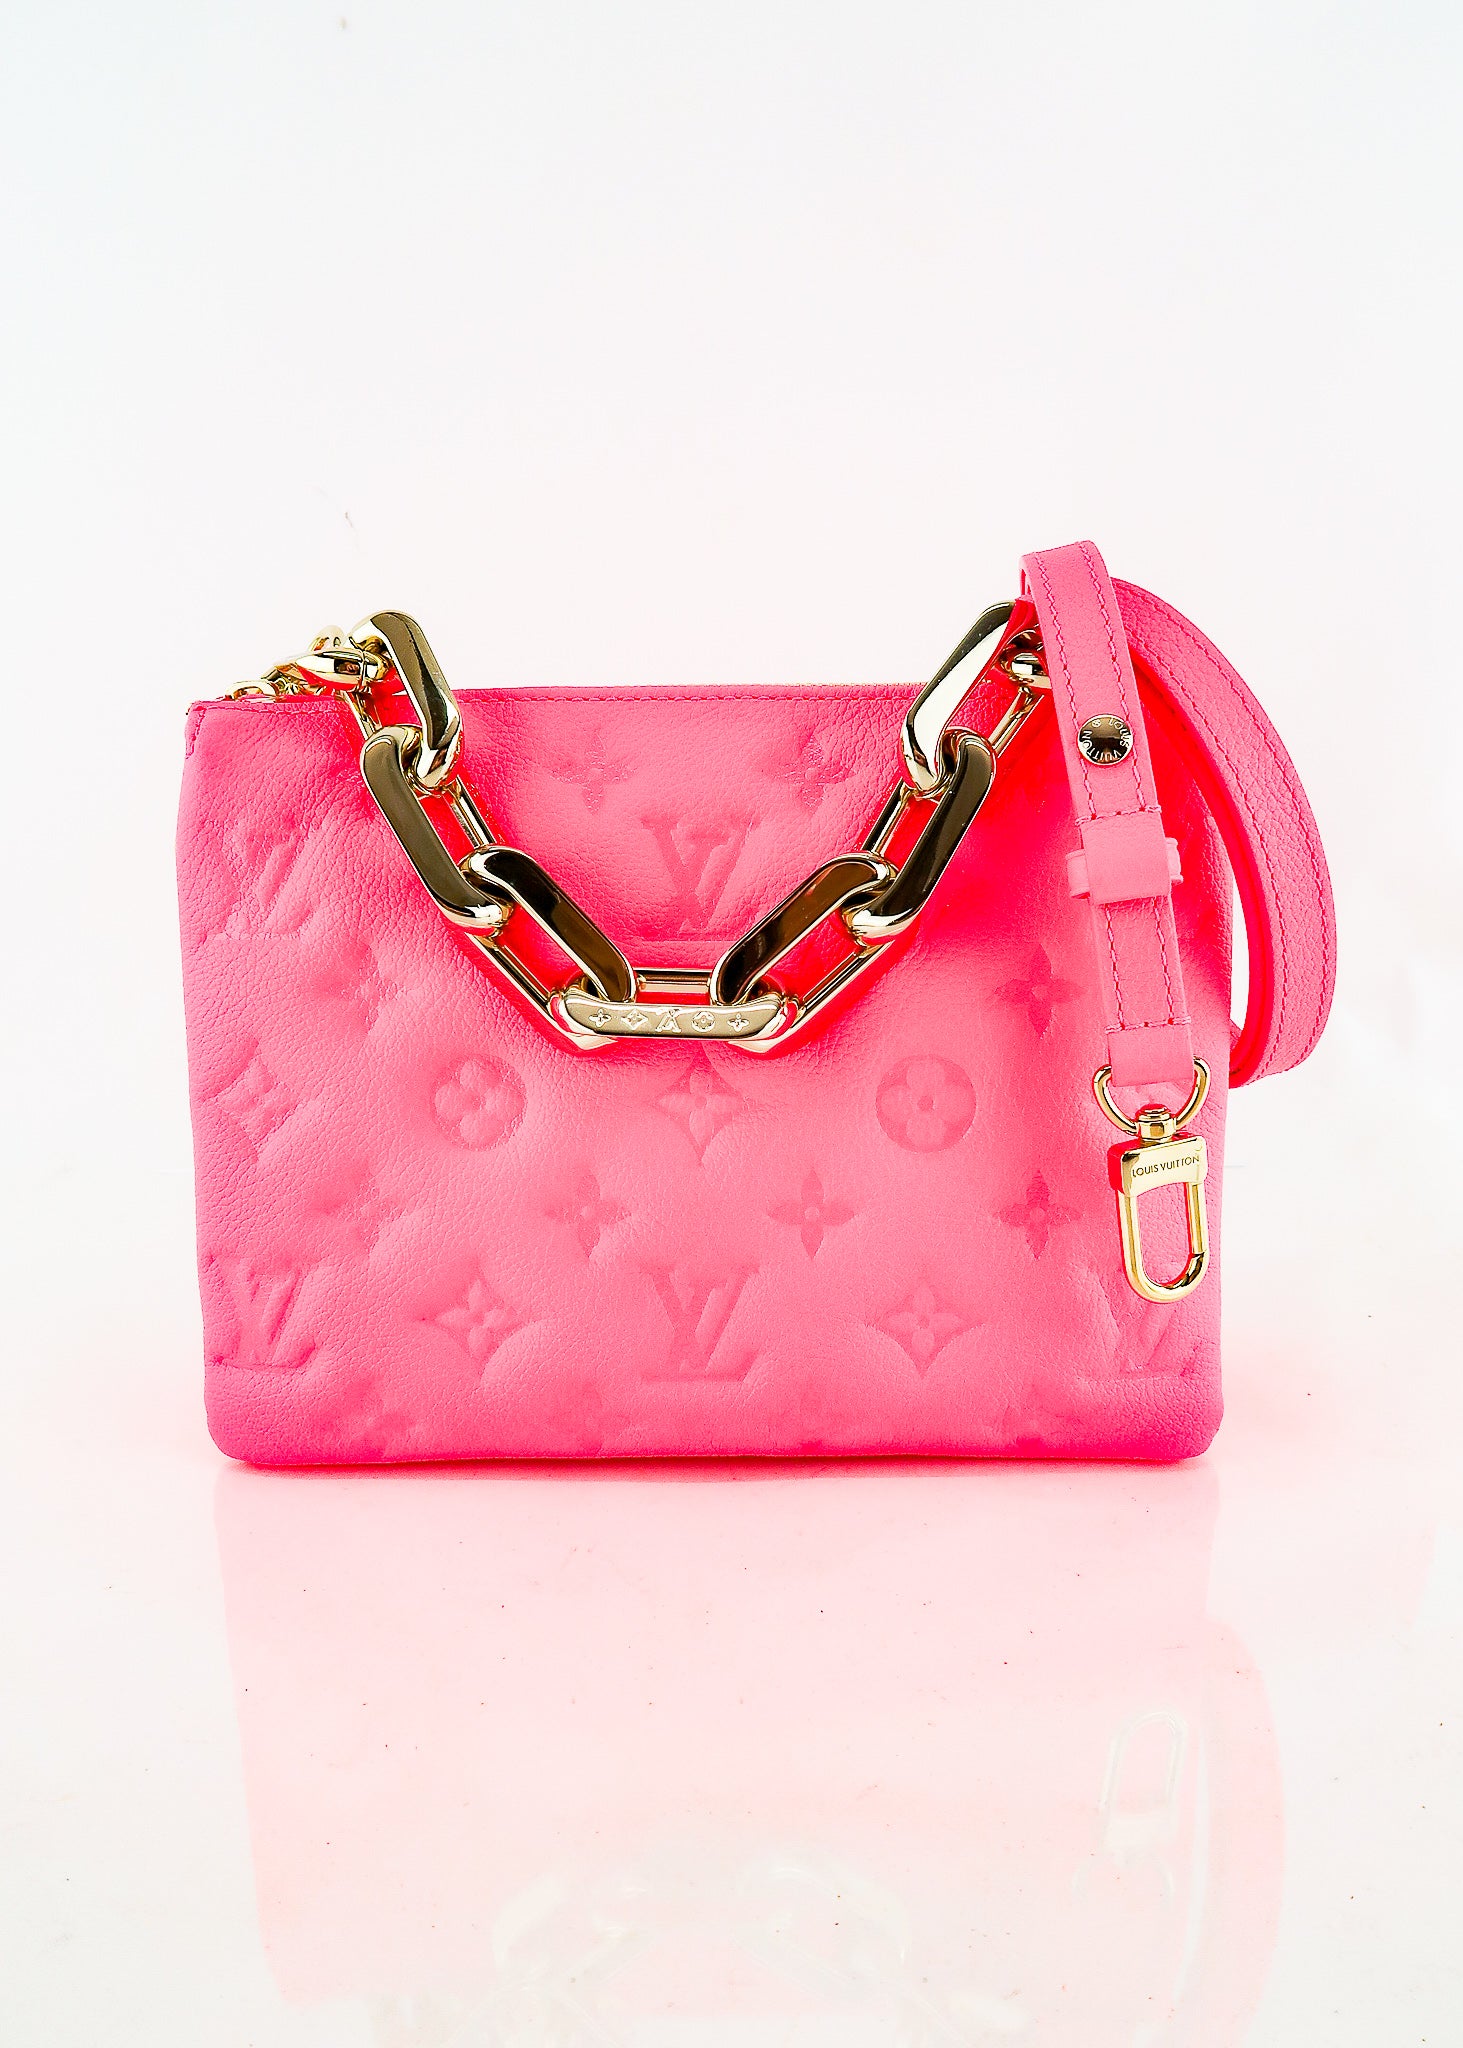 Louis Vuitton - Authenticated Coussin Handbag - Leather Pink Plain for Women, Very Good Condition